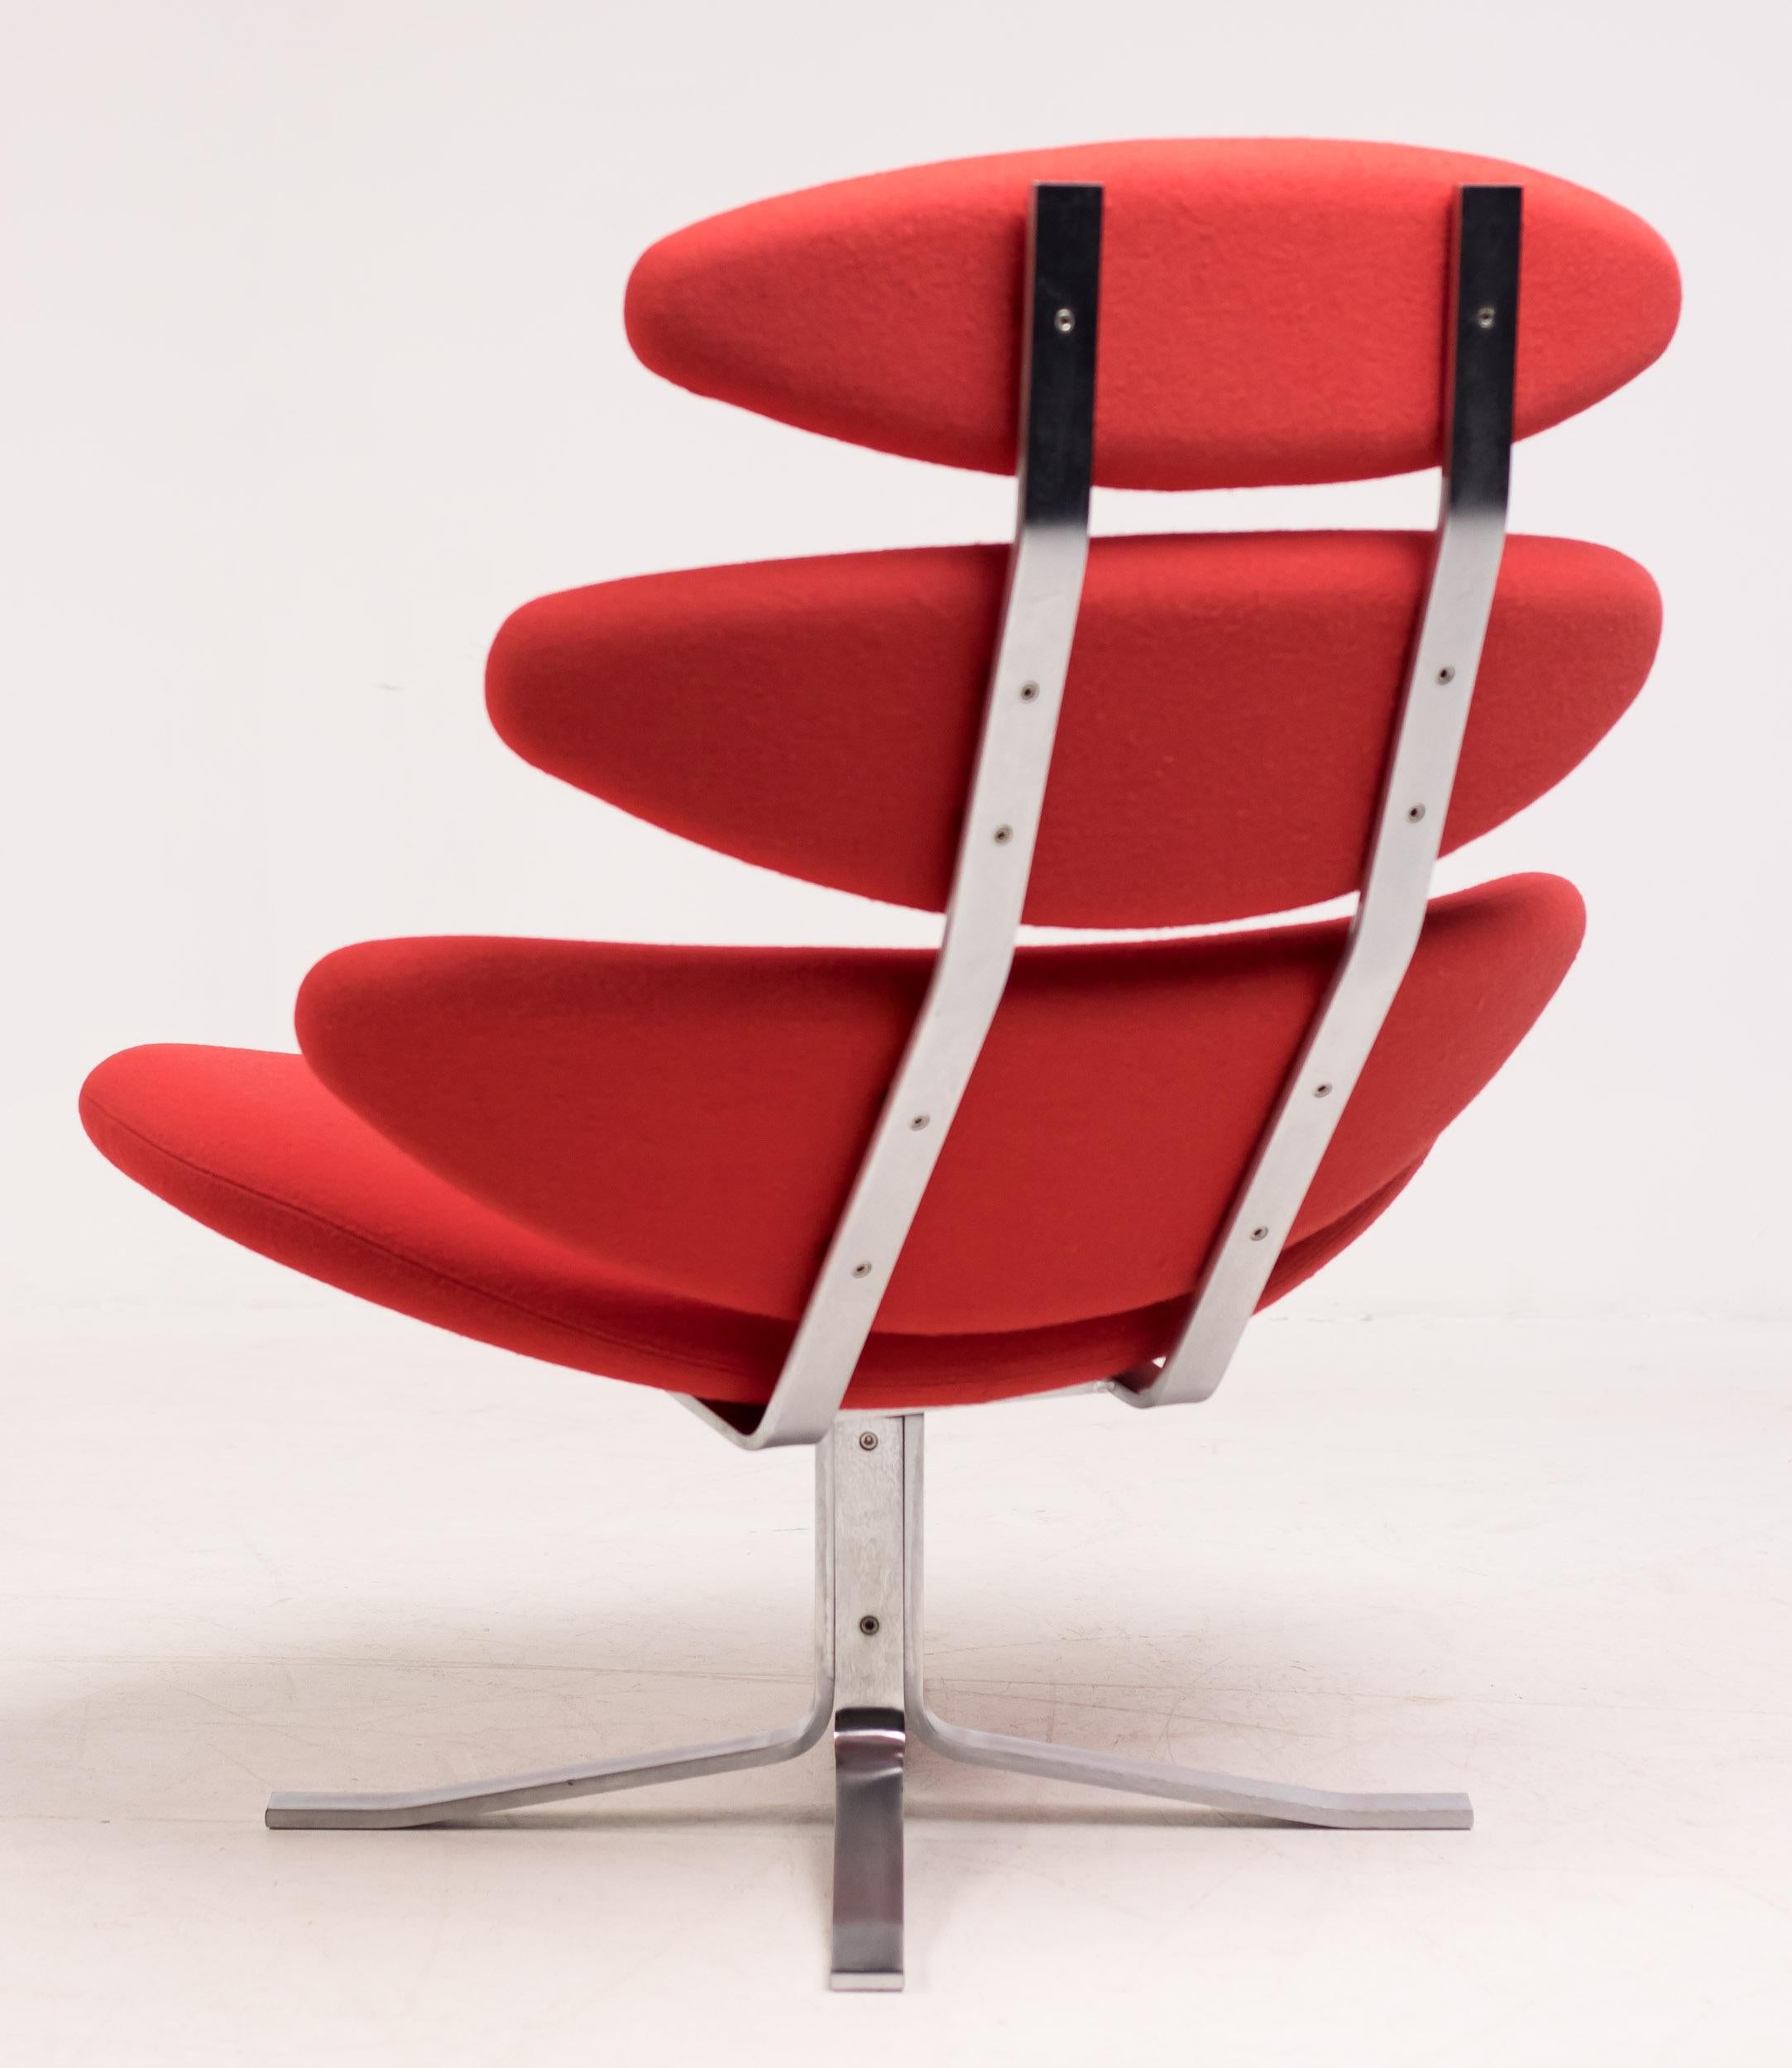 Erik Jorgensen model EJ 5 or corona swiveling lounge chair designed by Poul Volther.
This example in red Divina (wool felt) Kvadrat fabric.
The EJ 5 Corona chair is light yet has a sculptural gravity.
This combination made the corona a star in